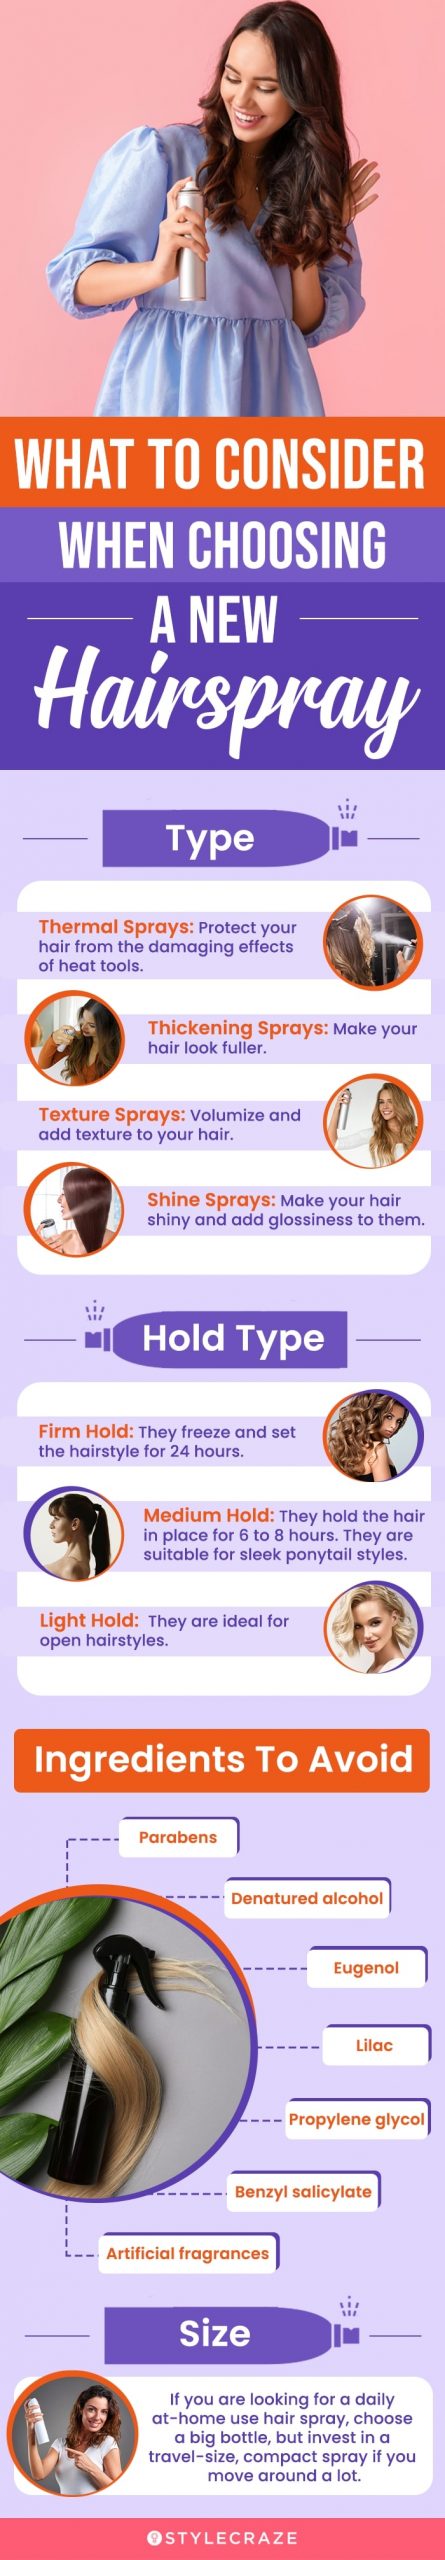 What To Consider When Choosing A New Hairspray (infographic)